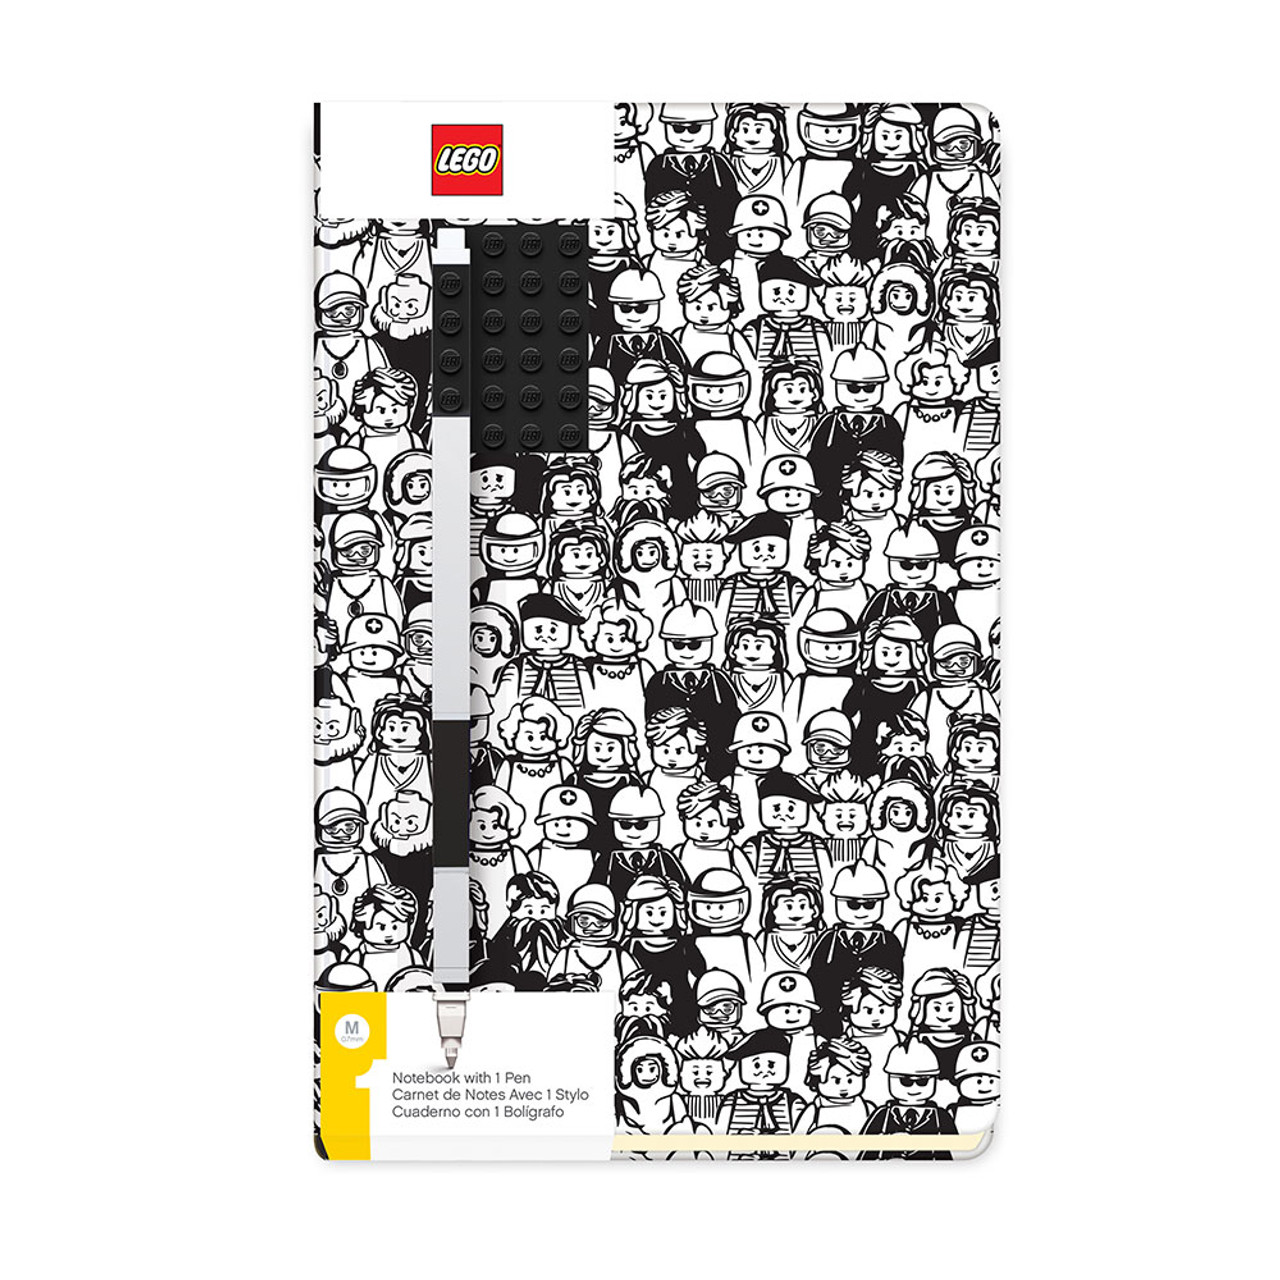 LEGO A5 JOURNAL WITH PEN BLACK AND WHITE DESIGN